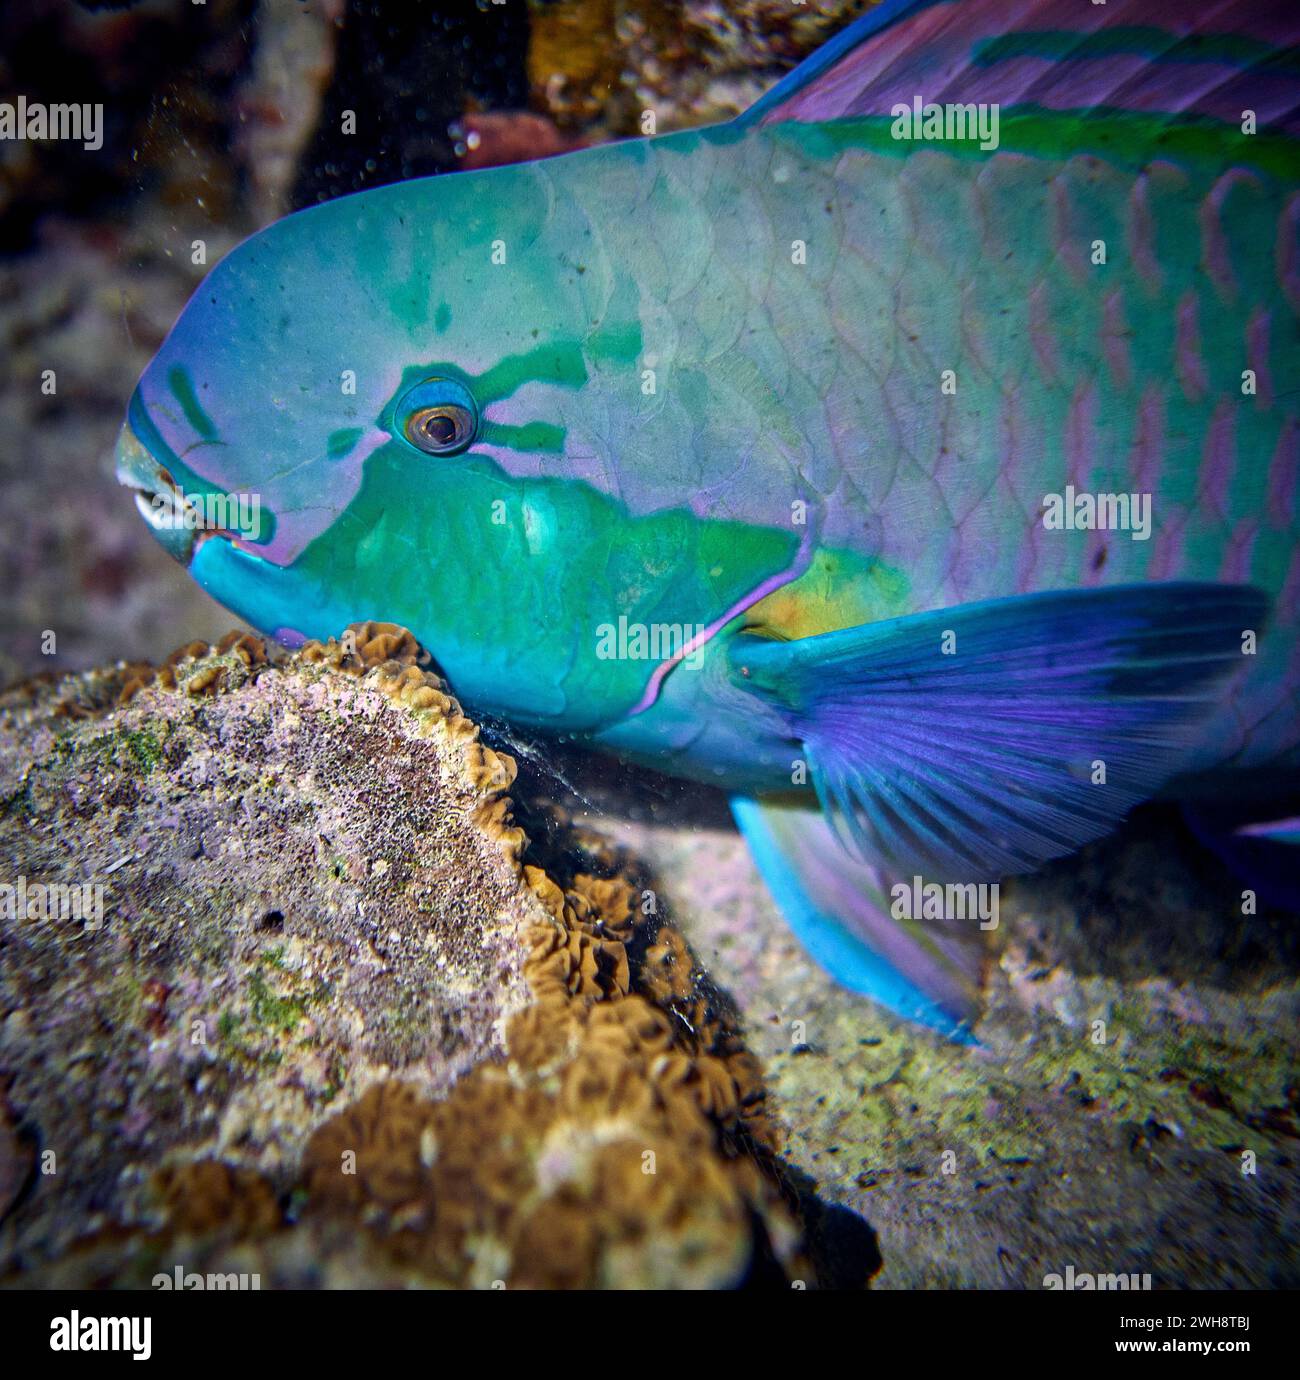 The beauty of the underwater world - Cetoscarus bicolor, also known as the bicolour parrotfish or bumphead parrotfish - scuba diving in the Red Sea, E Stock Photo